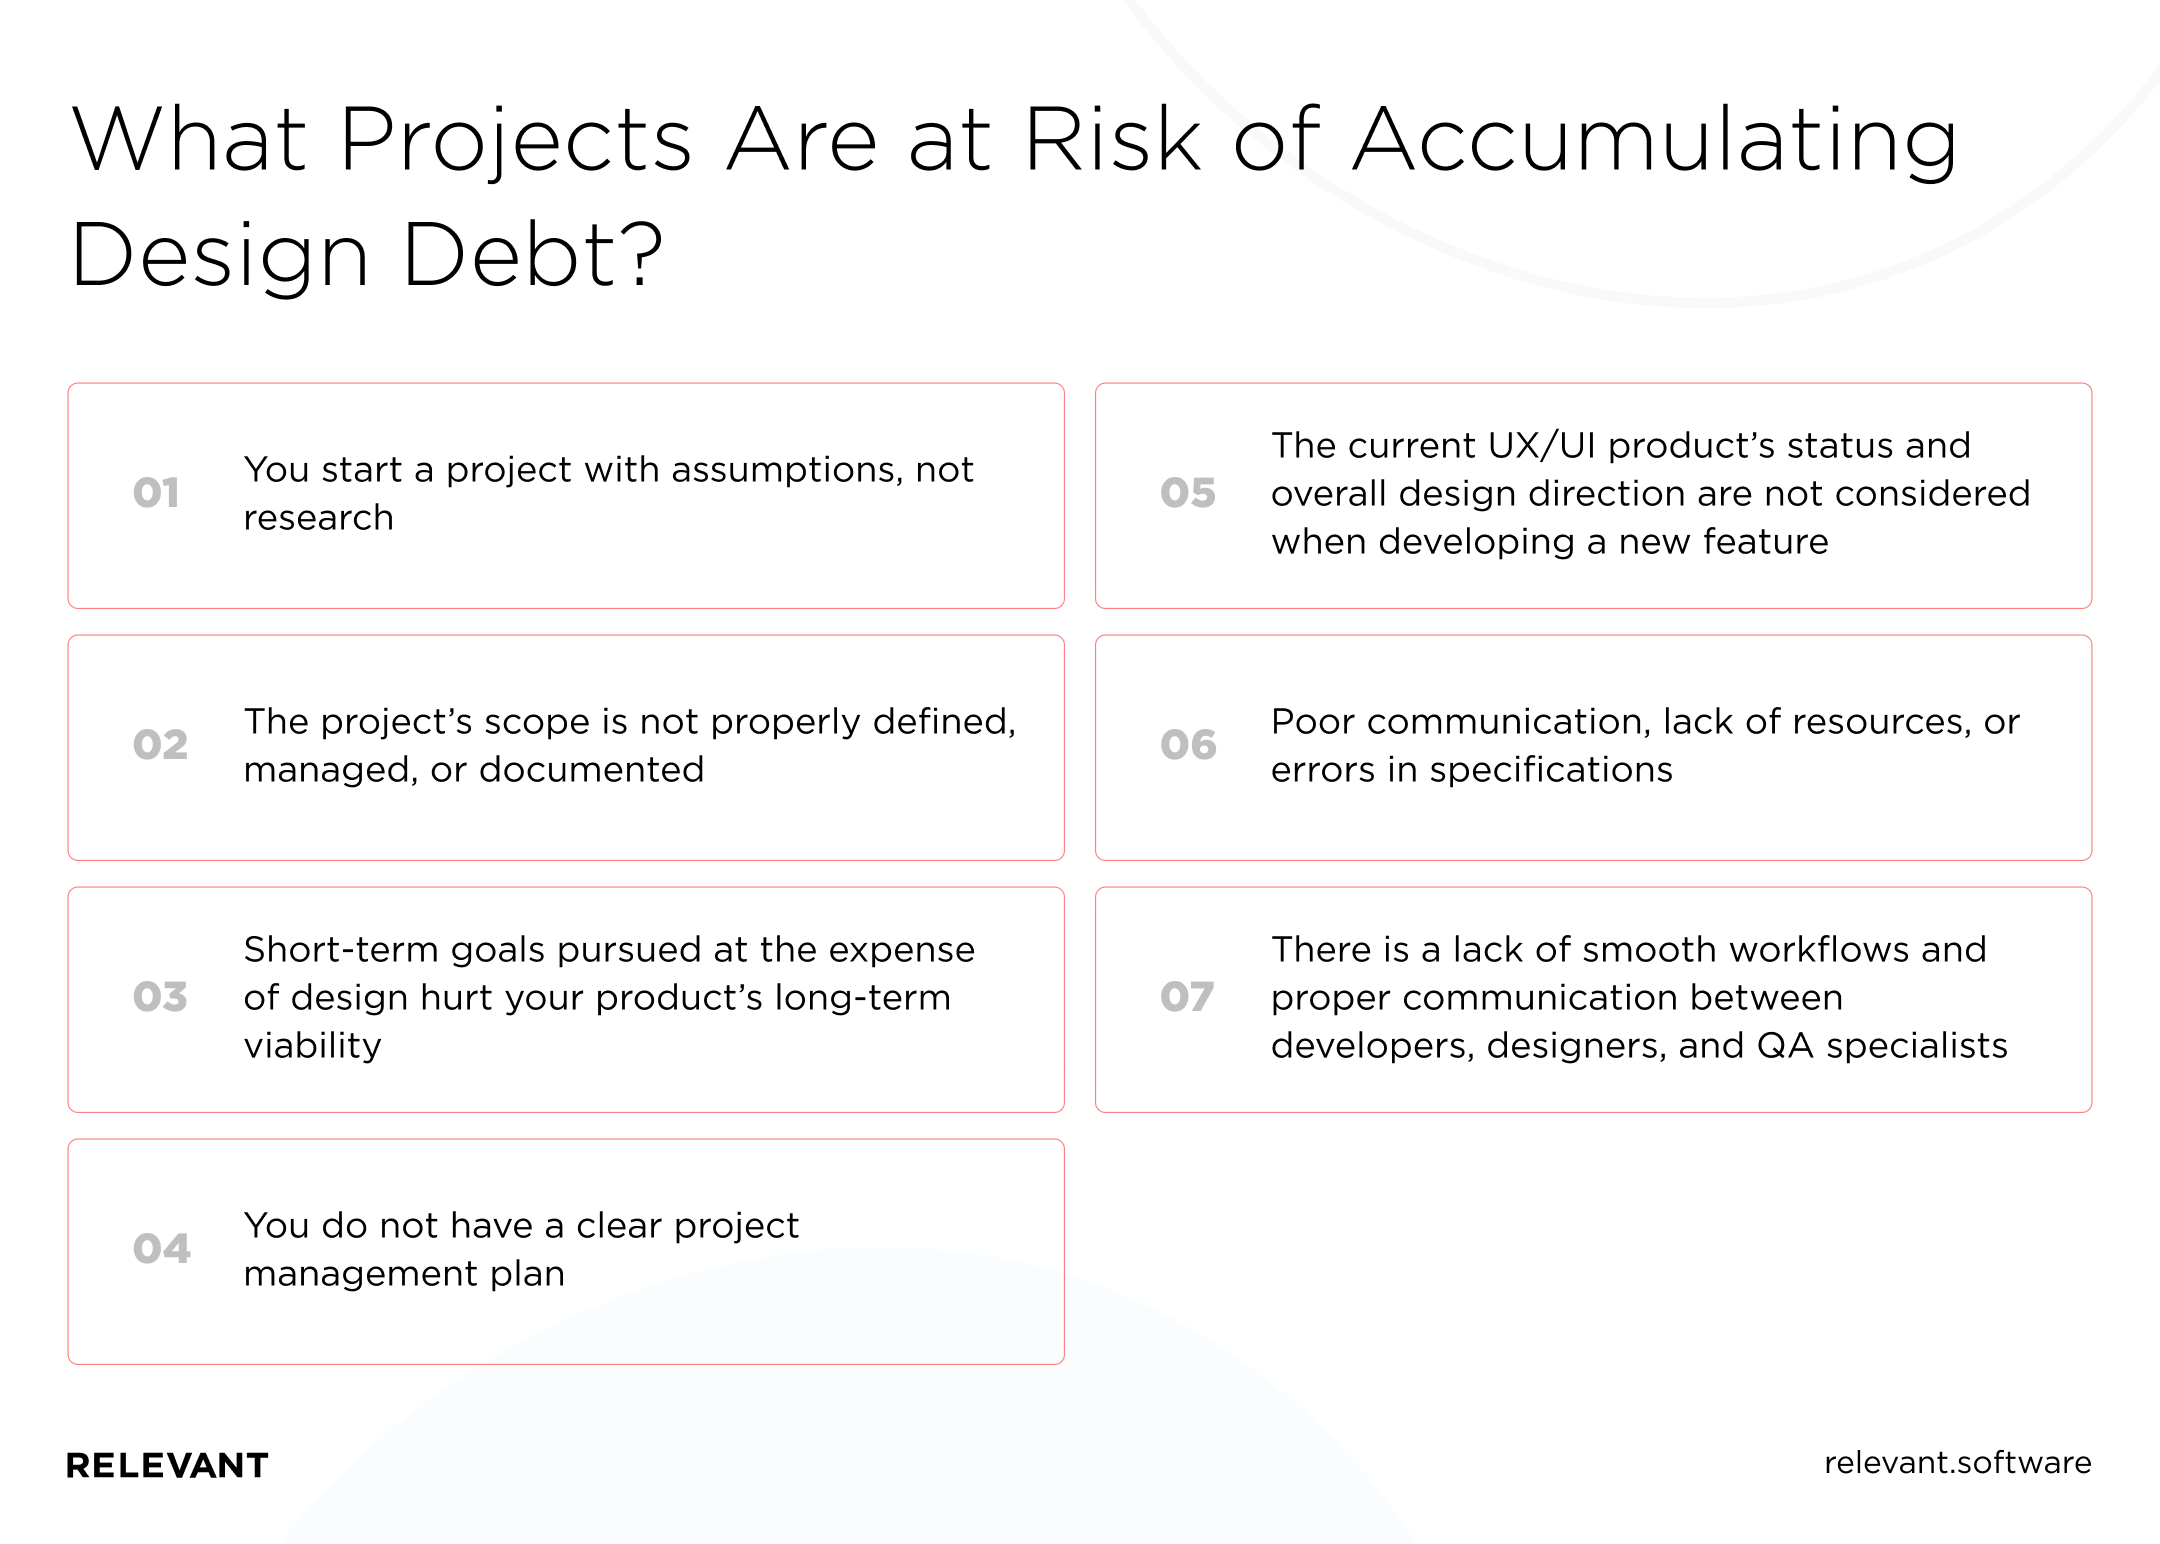 What Projects Are at Risk of Accumulating Design Debt?